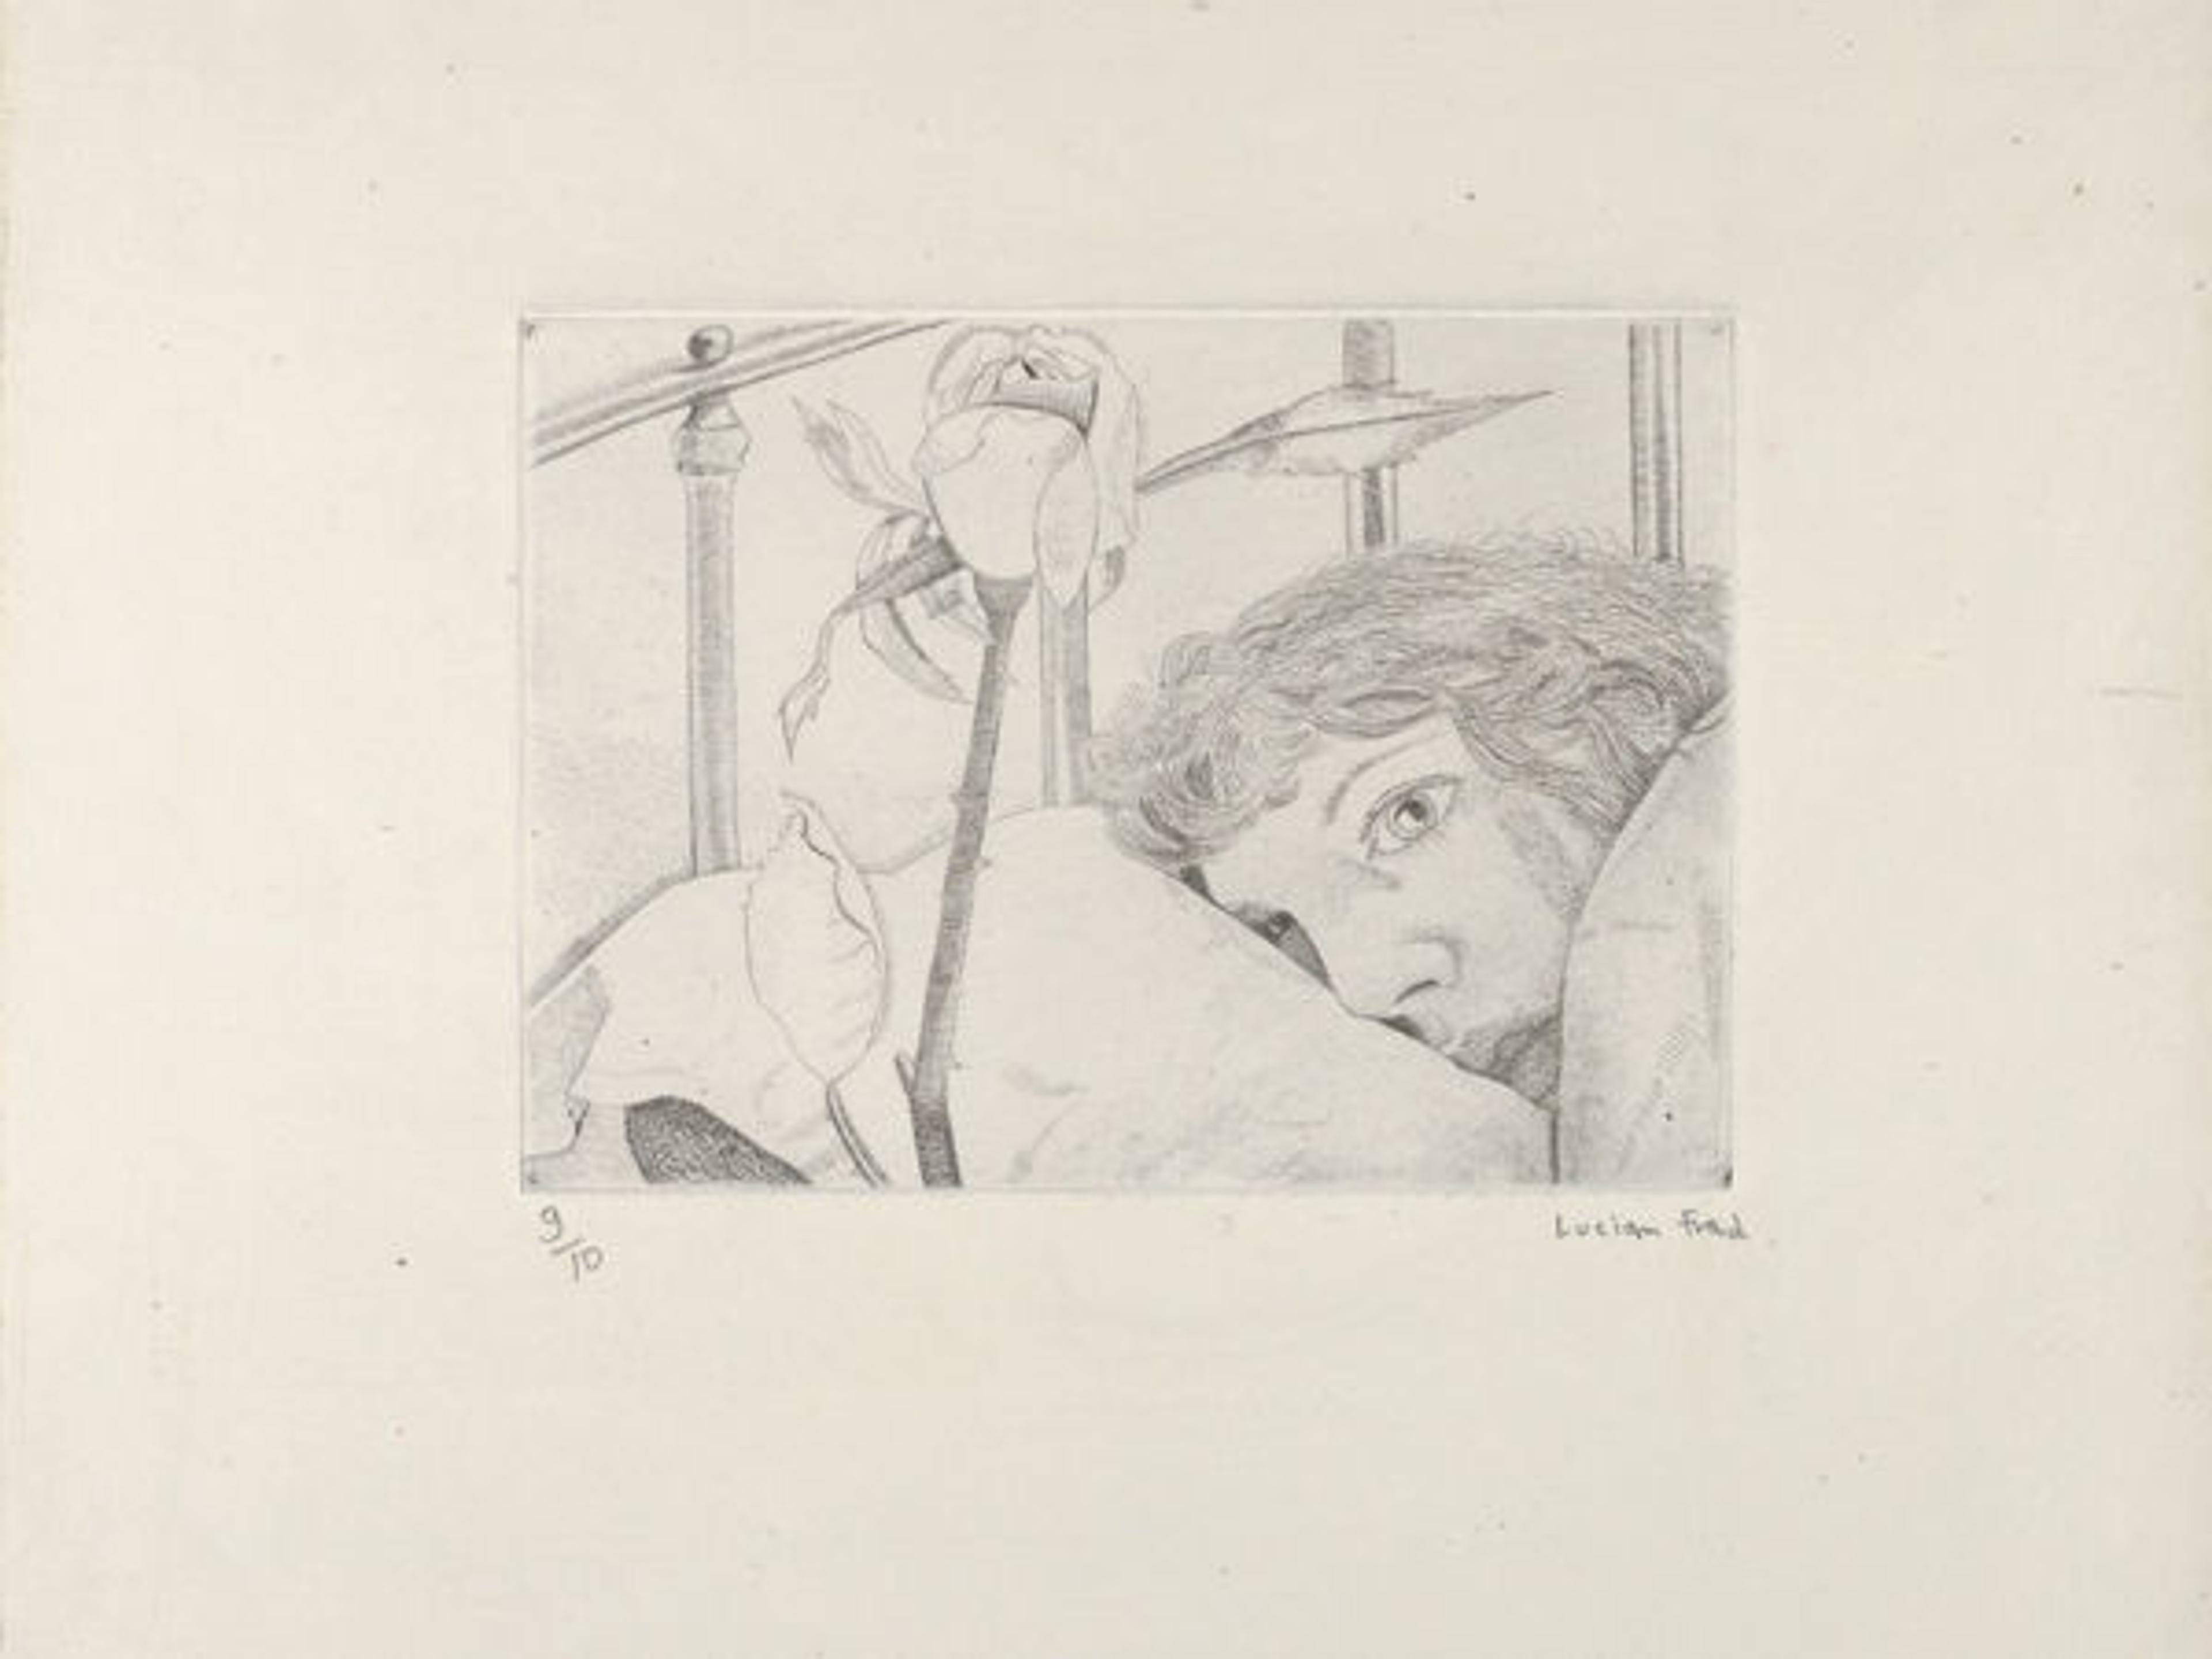 Lucian Freud, (British [born Germany], 1922–2011). Ill in Paris, 1948. Etching; plate: 5 1/8 x 7 in. (13 x 17.8 cm), sheet: 10 3/4 x 13 in (27.3 x 33 cm), The Metropolitan Museum of Art, New York, Bequest of William S. Lieberman (2005 2007.49.613)